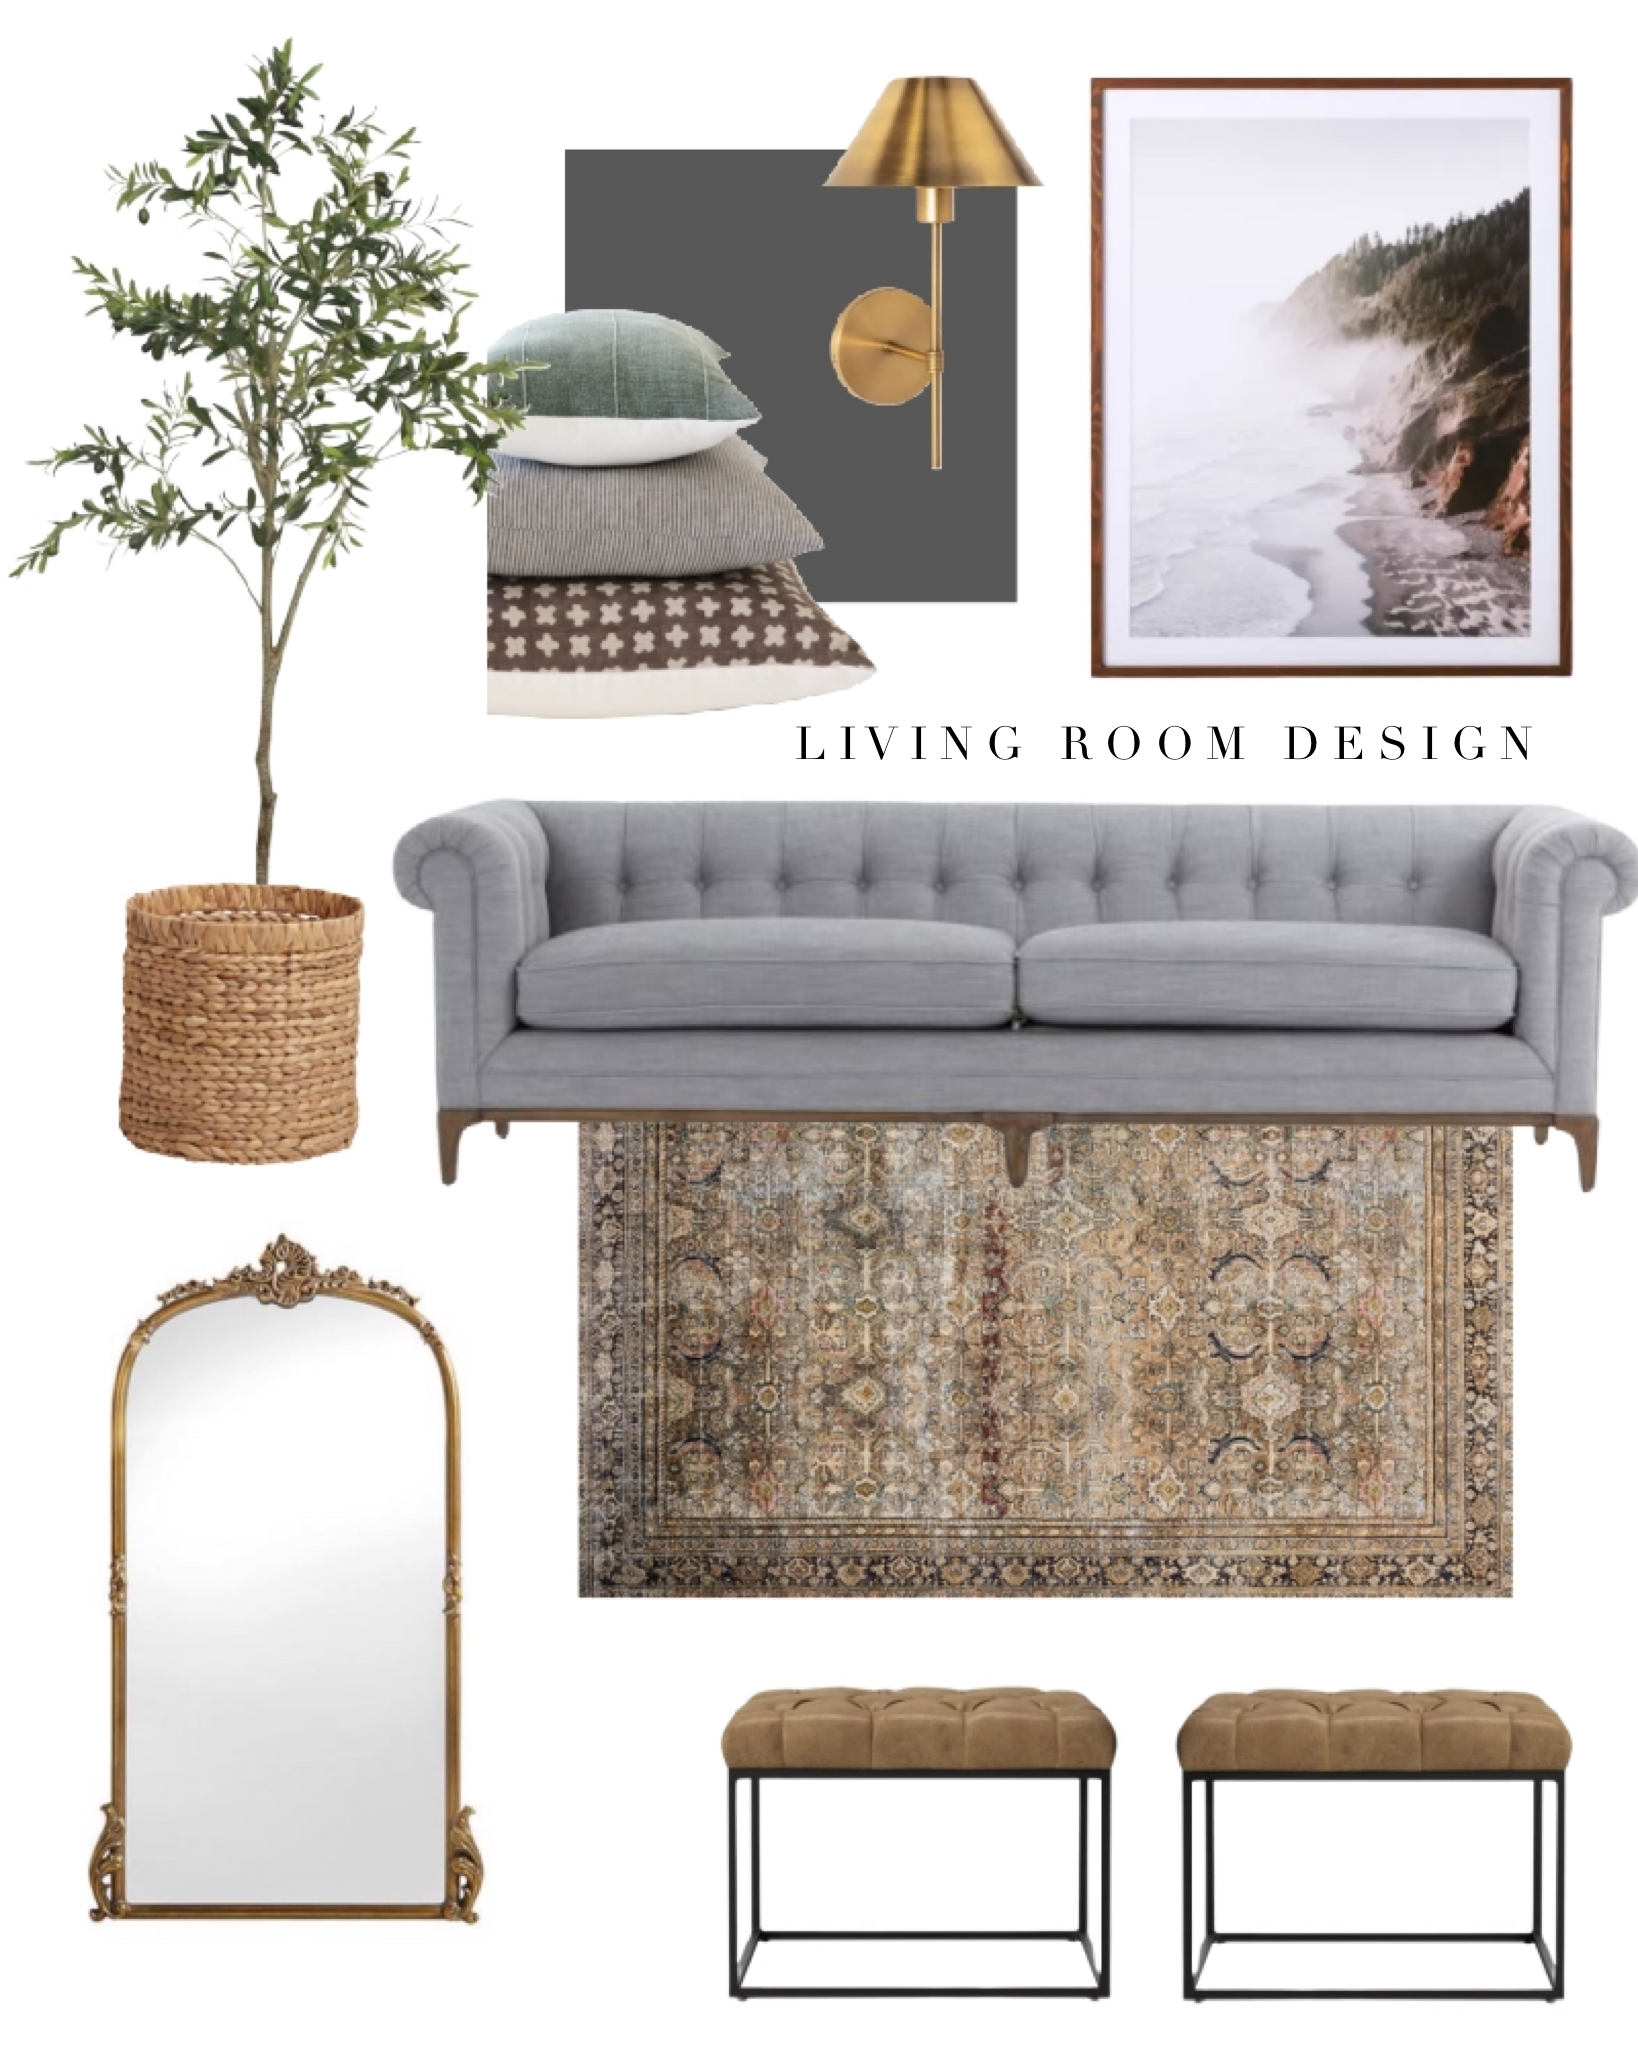 Living Room Update A Thoughtful Place, How To Modernize A Formal Living Room